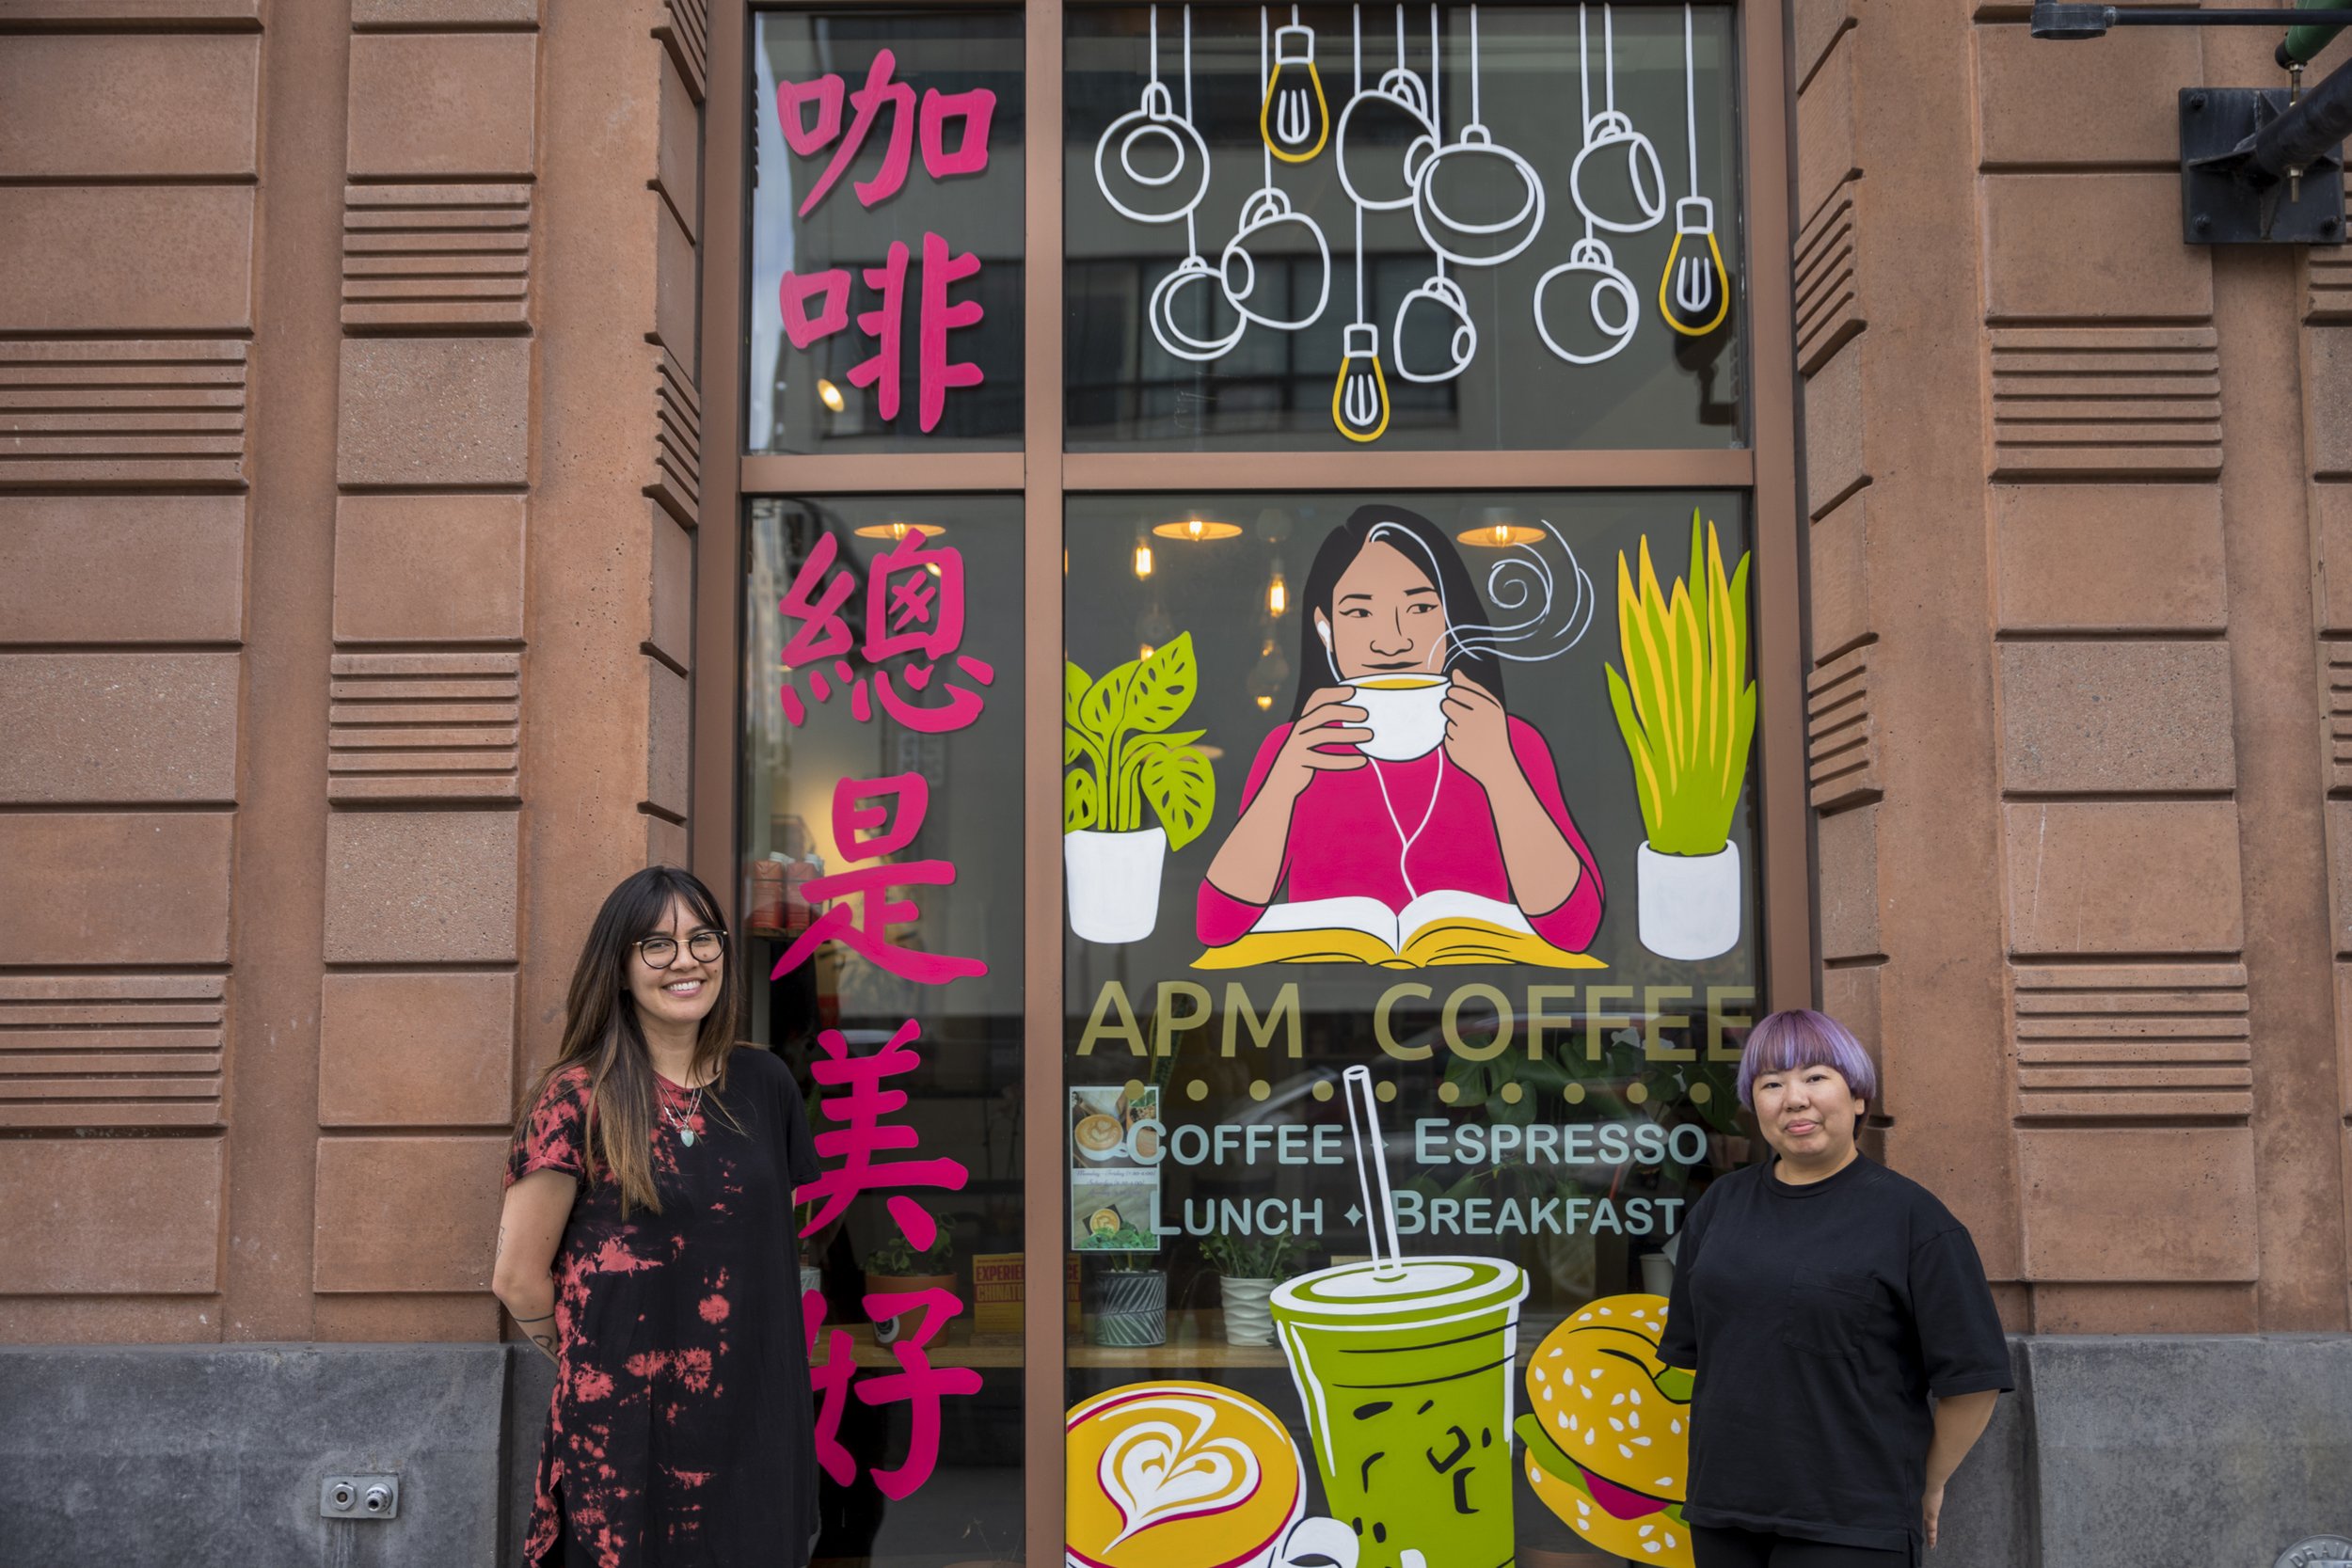 Amanda Beard Garcia in front of her mural, "Coffee is always beautiful," at APM Coffee with APM Coffee Co-Owner Alice Mei